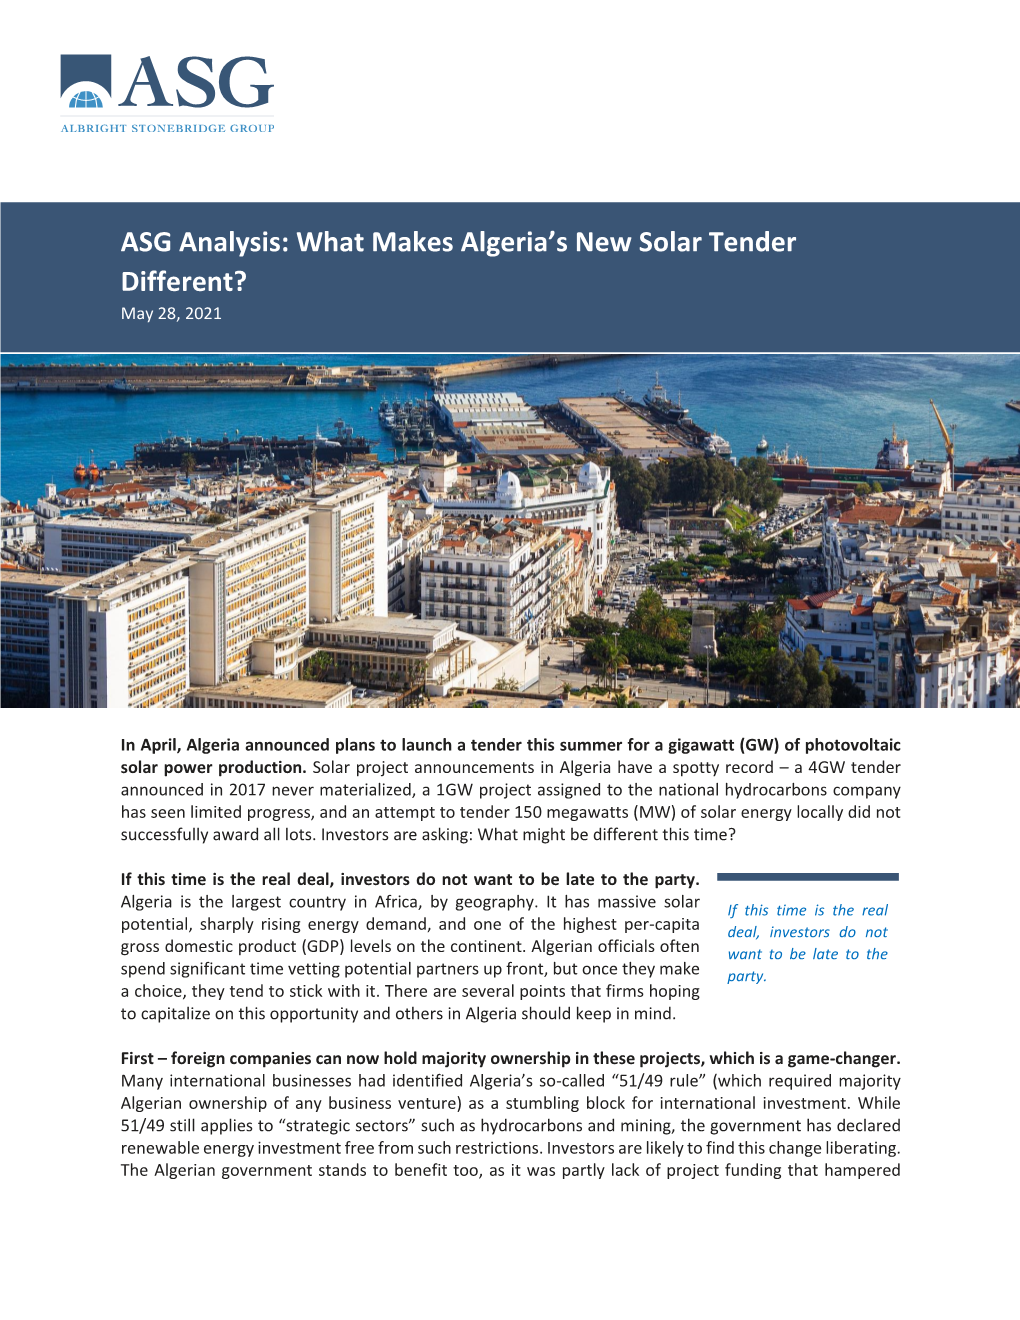 ASG Analysis: What Makes Algeria’S New Solar Tender Different? May 28, 2021